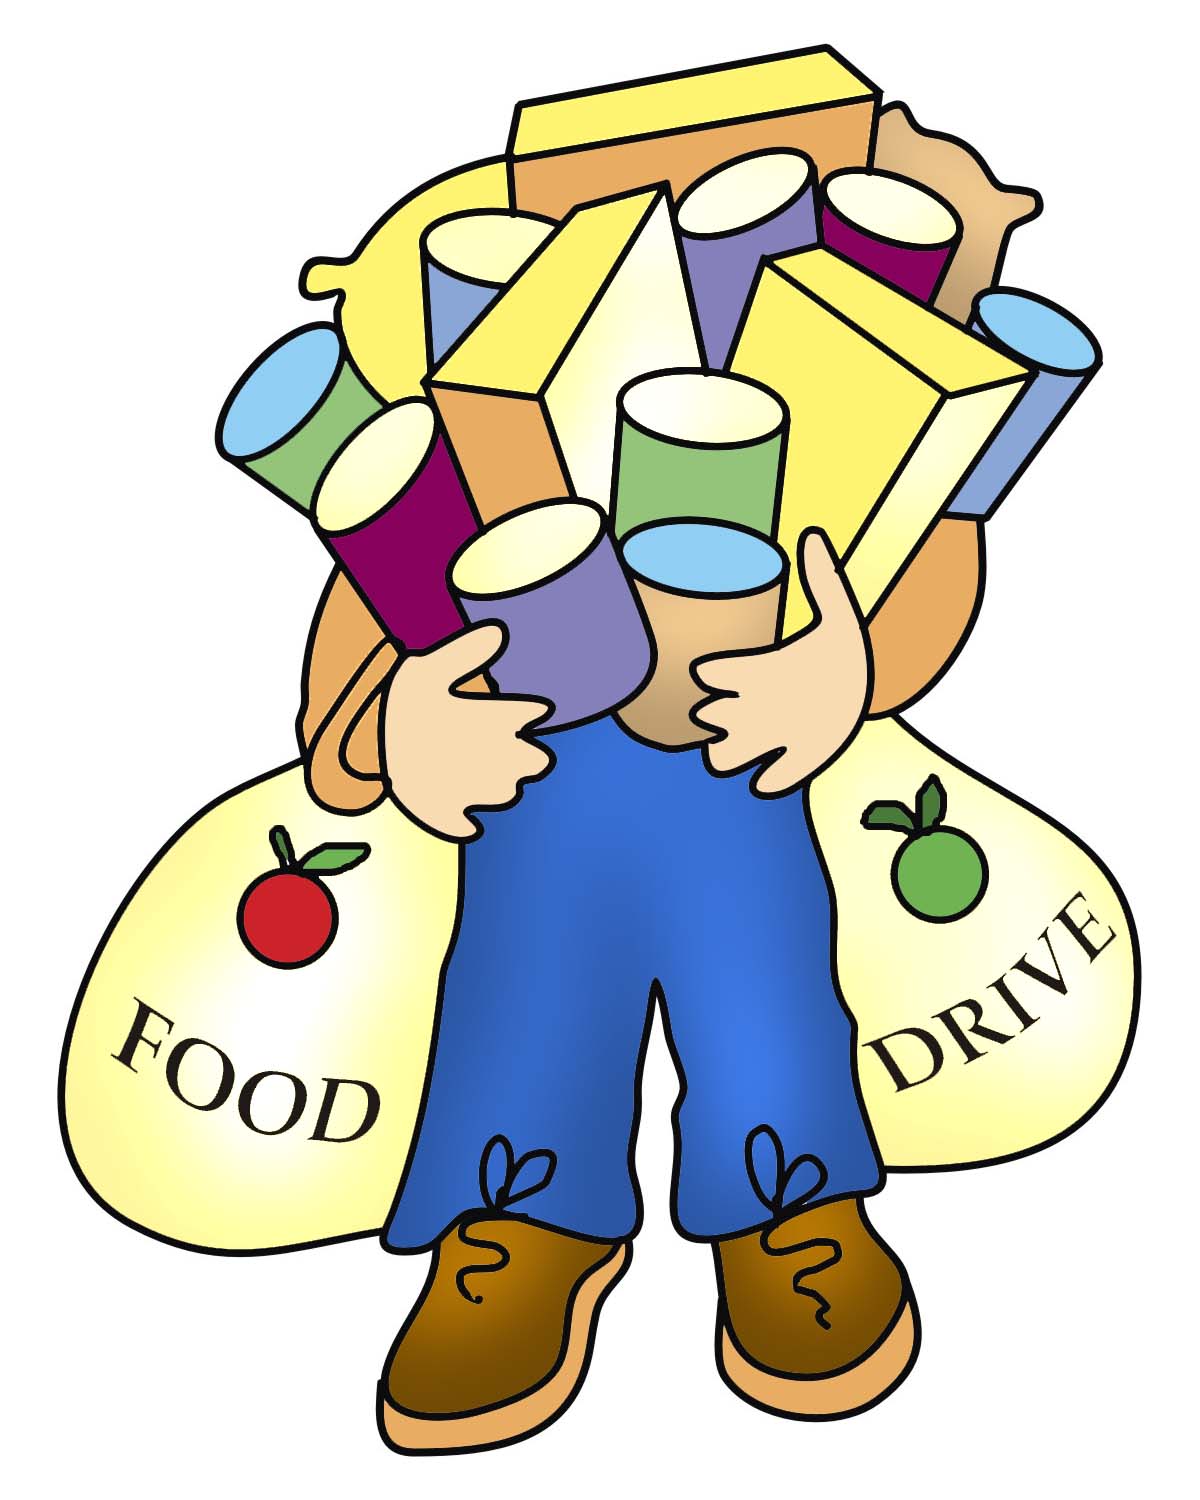 Can food bank clip art | Clipart Panda - Free Clipart Images